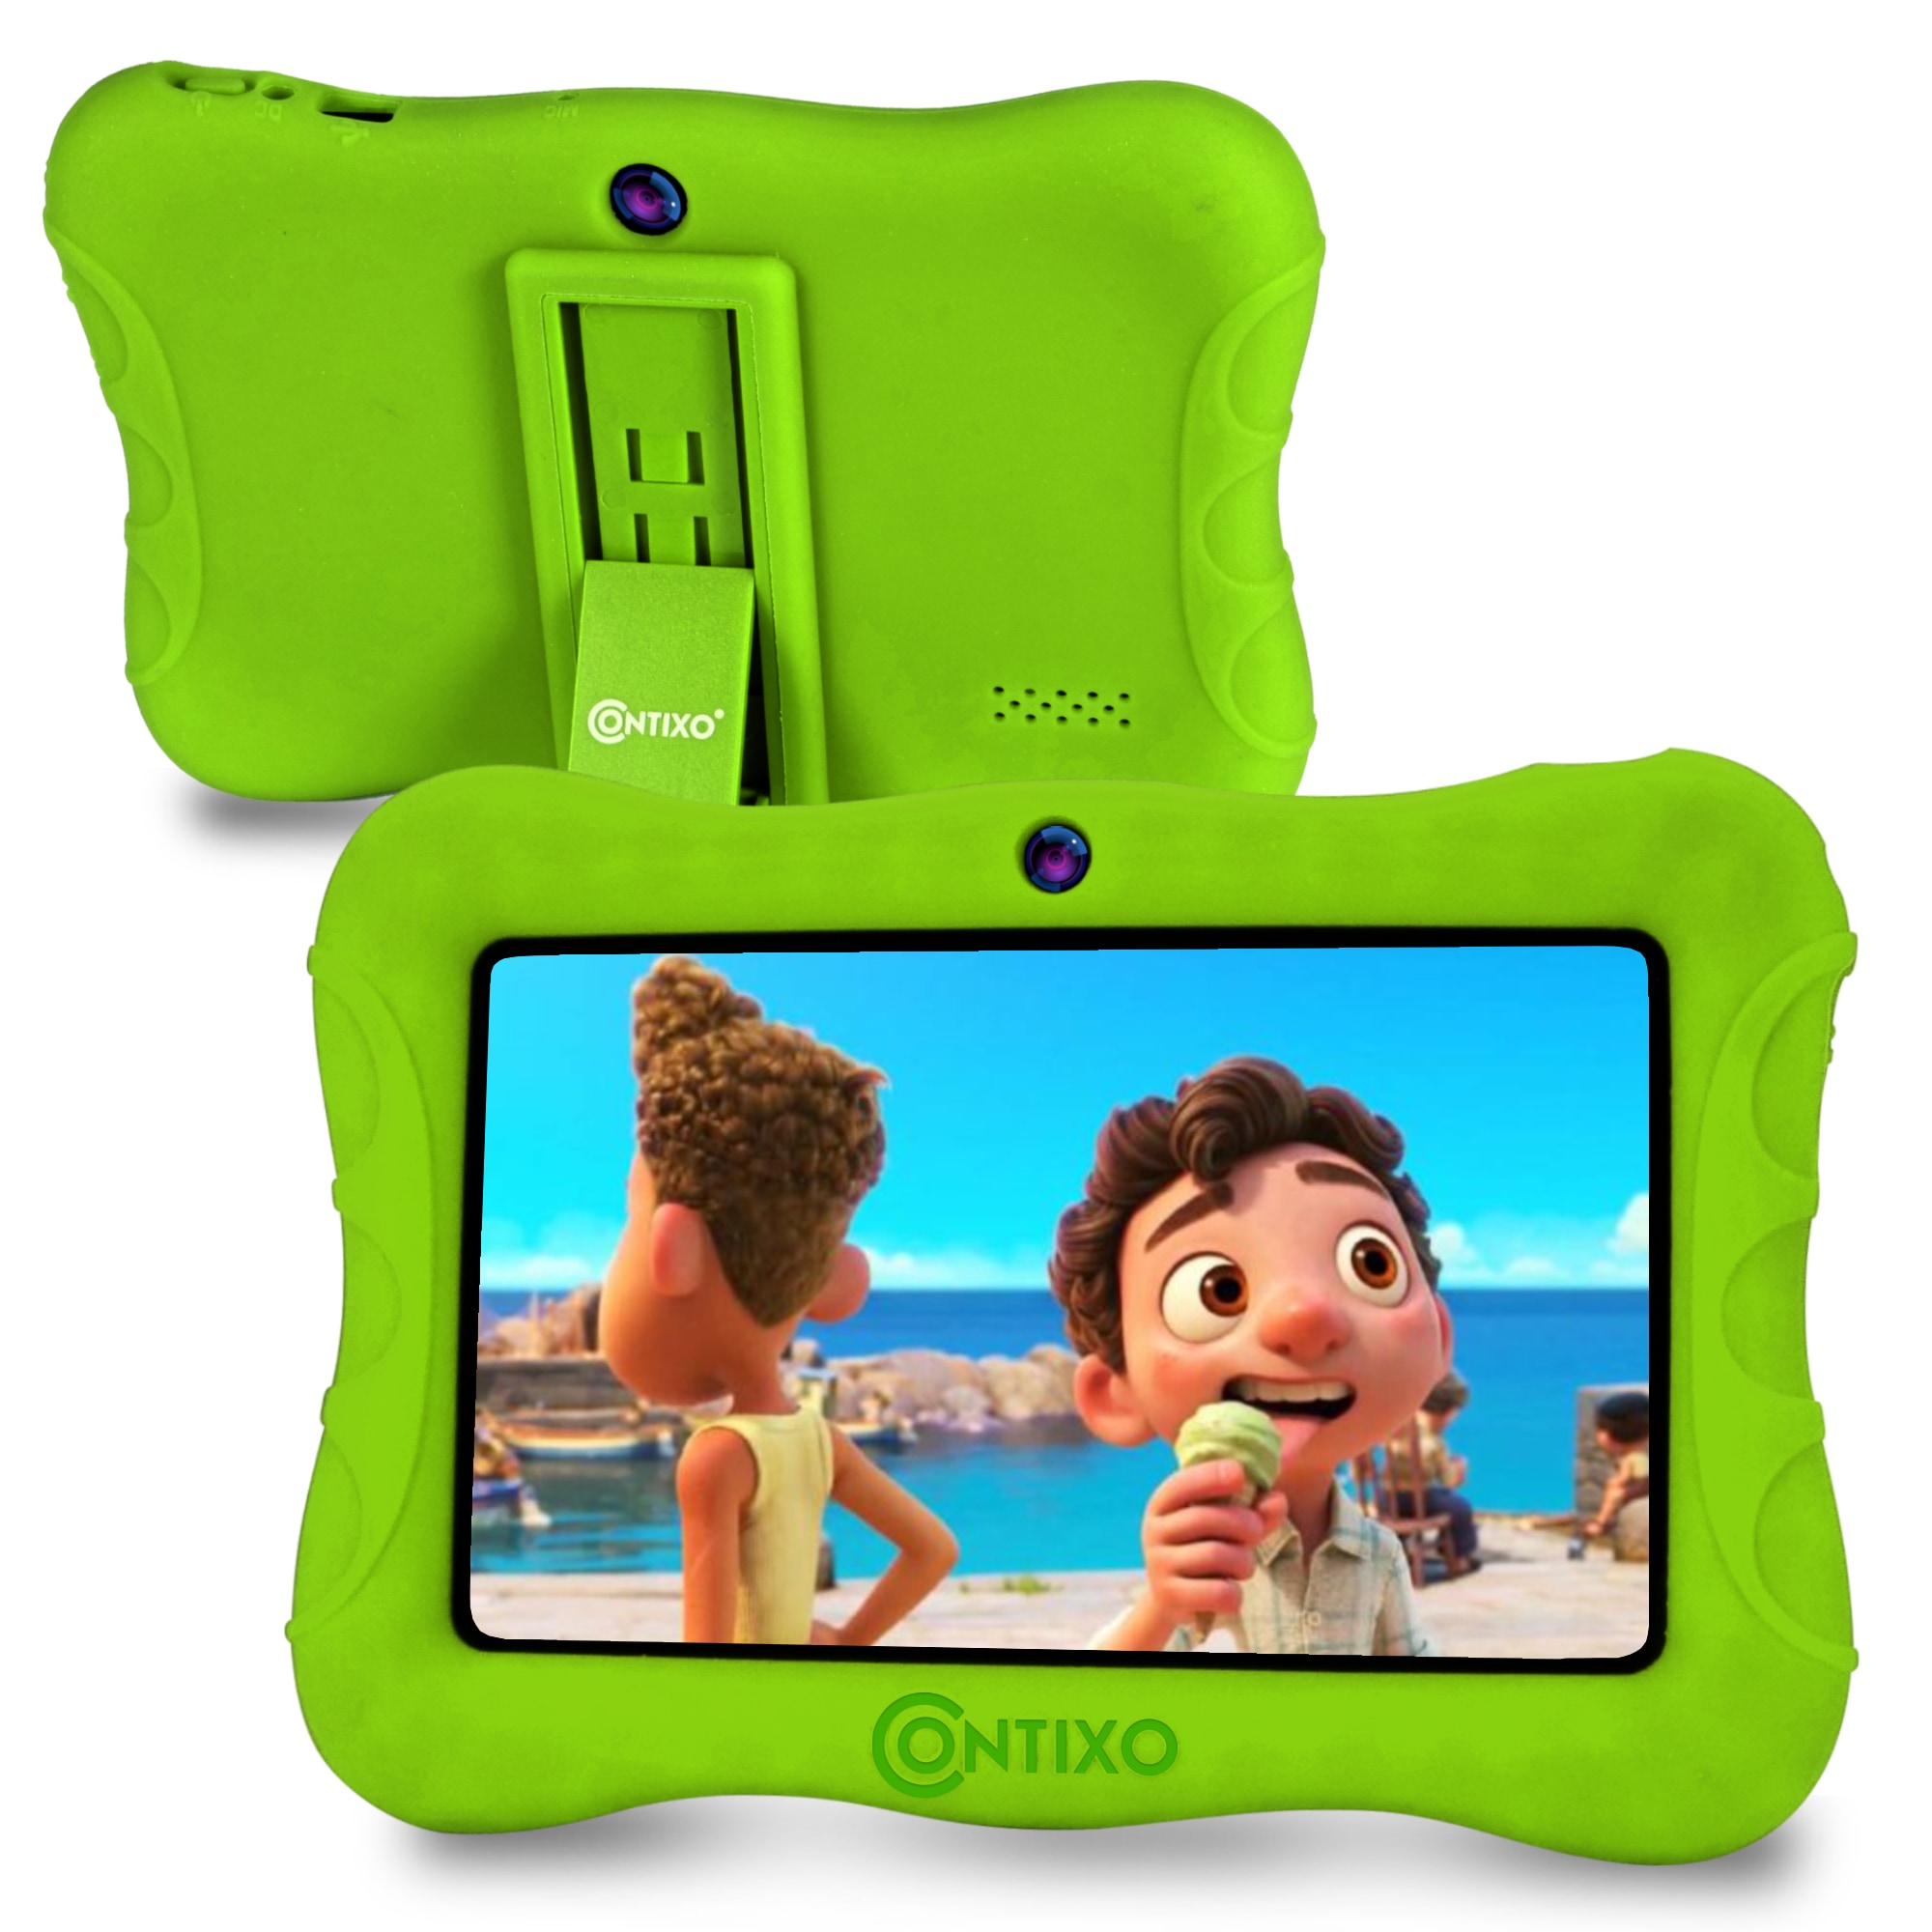 Contixo Contixo 7 inch Kids Tablet 2GB Ram 32GB Data Storage with Latest Android 10 OS Wi-Fi Blue Tooth Tablets for Kids, V9-3-32-Green